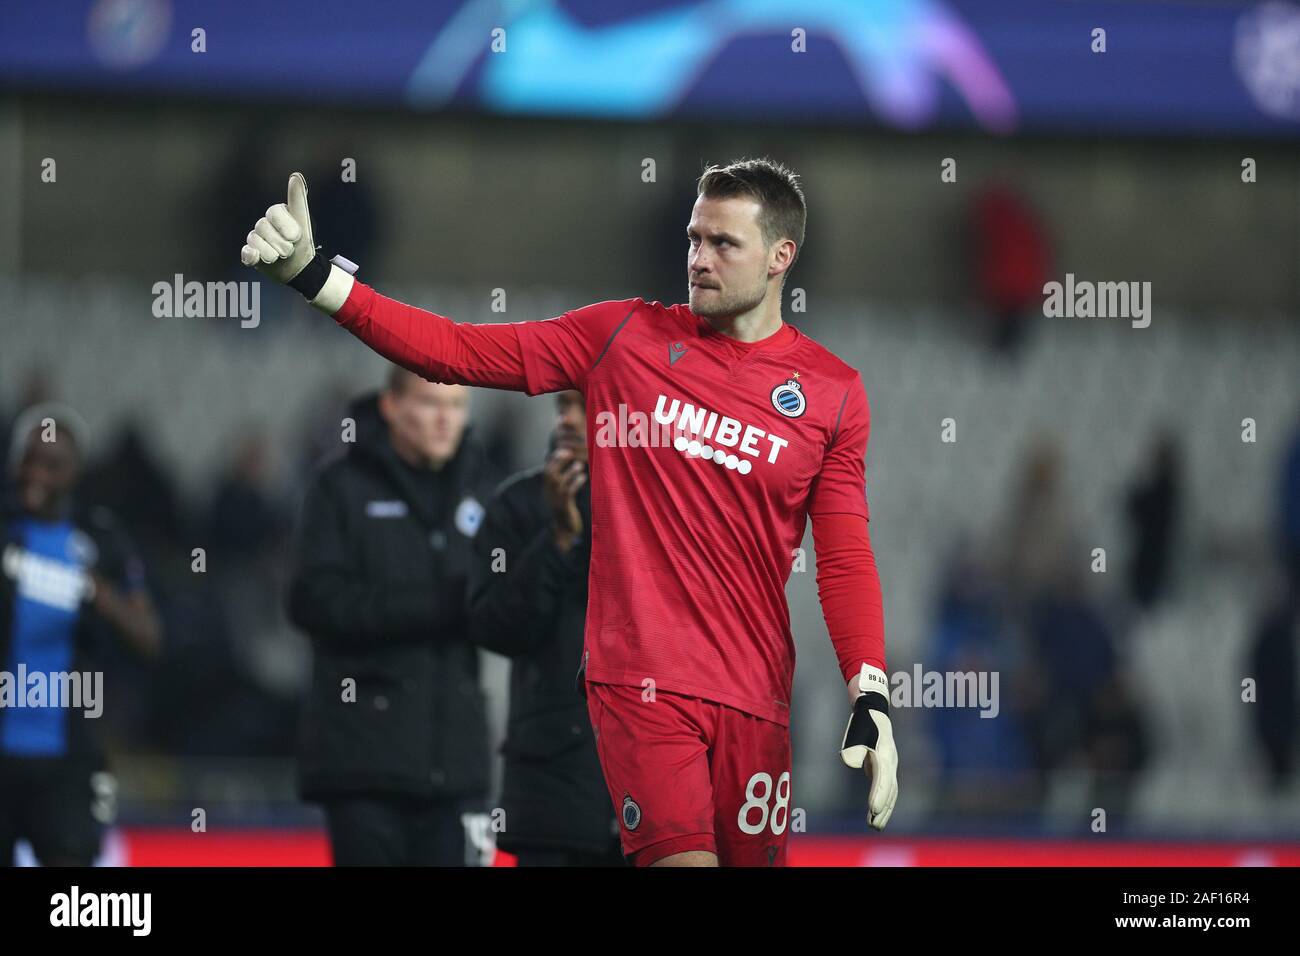 Brugge, Belgium. 11th Dec, 2019. Goalkeeper Simon Mignolet of Club Brugge greets spectators after a Group A match of the 2019-2020 UEFA Champions League between Club Brugge and Real Madrid in Brugge, Belgium, Dec. 11, 2019. Credit: Zheng Huansong/Xinhua/Alamy Live News Stock Photo